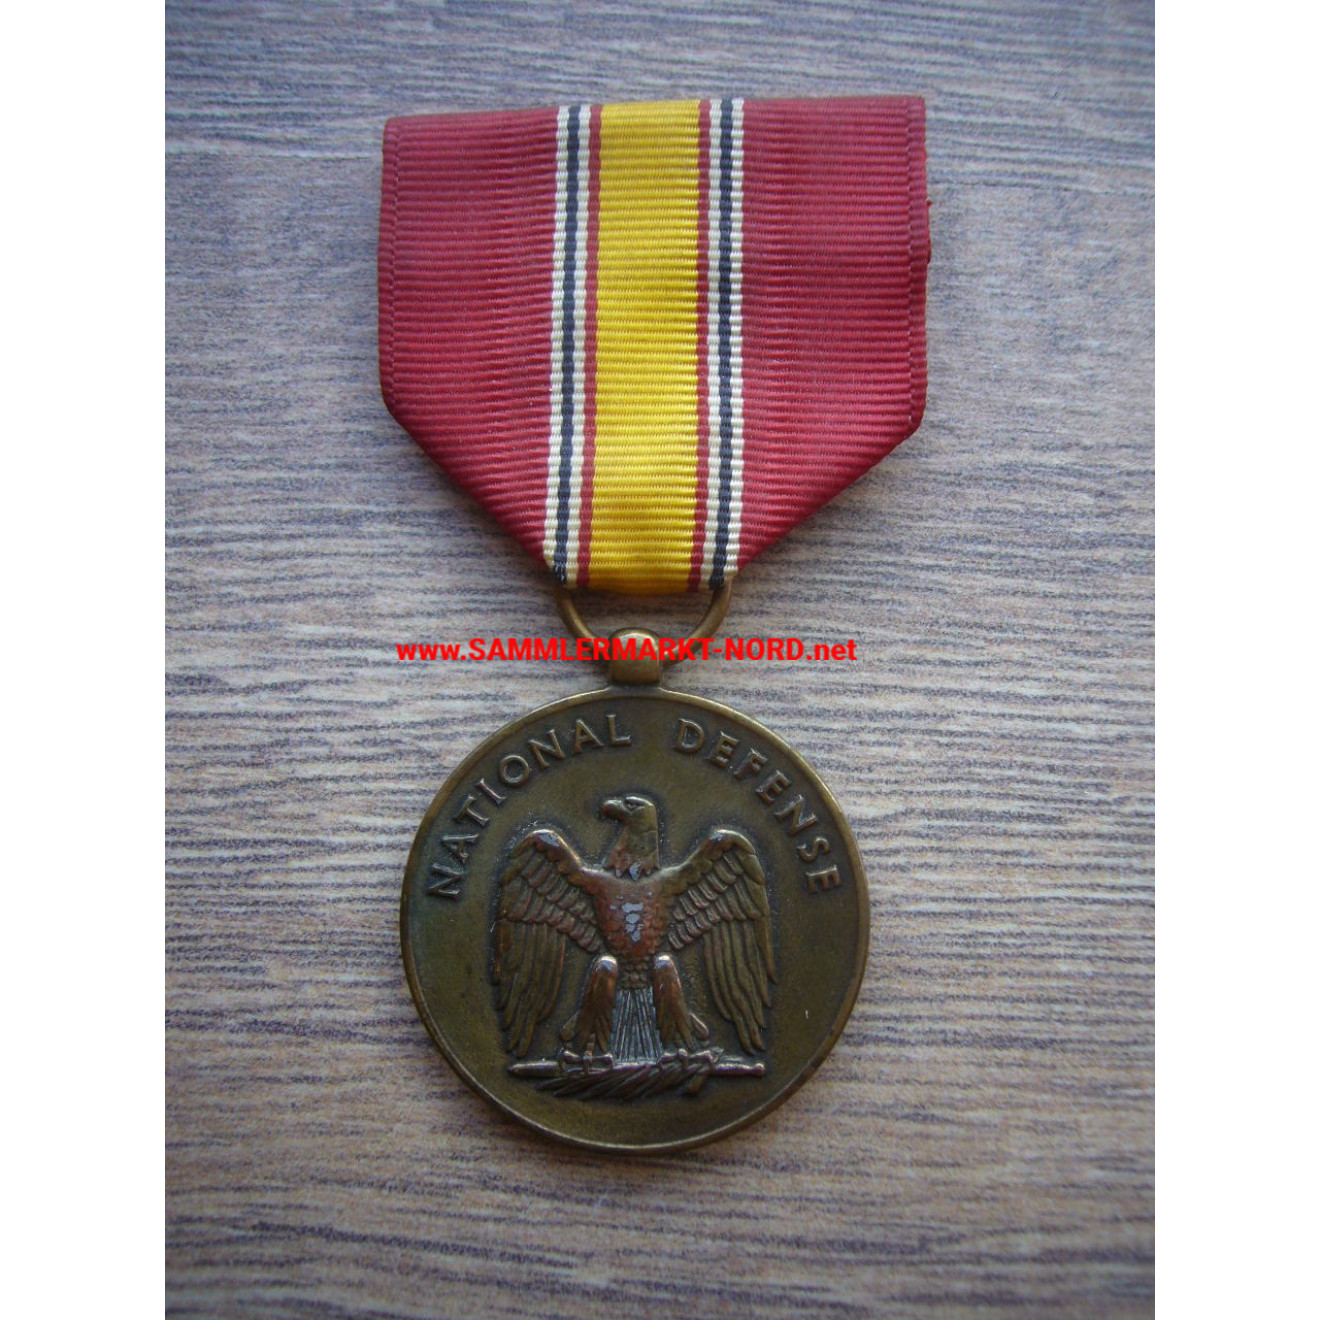 USA - National Defence Medaille